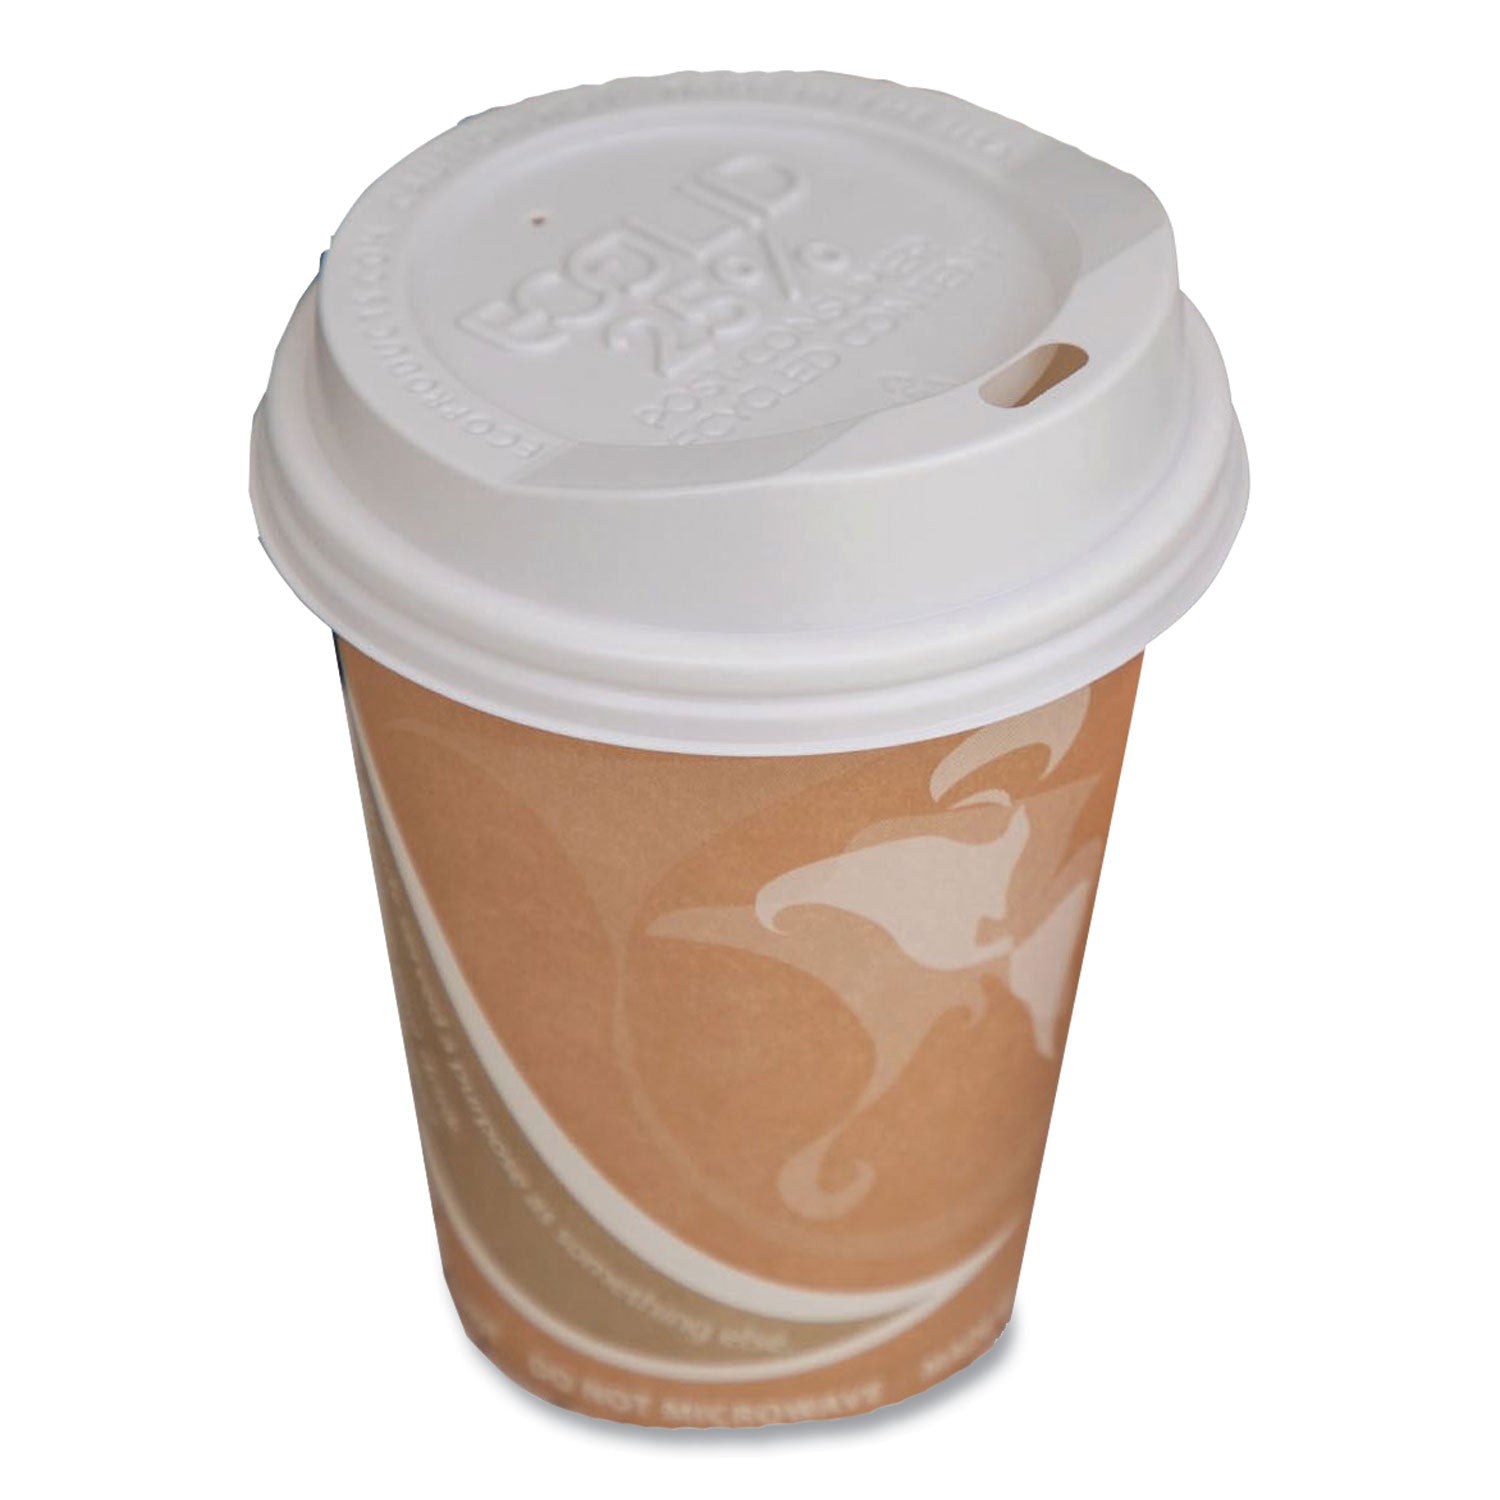 EcoLid 25% Recycled Content Hot Cup Lid, White, Fits 8 oz Hot Cups, 100/Pack, 10 Packs/Carton - 